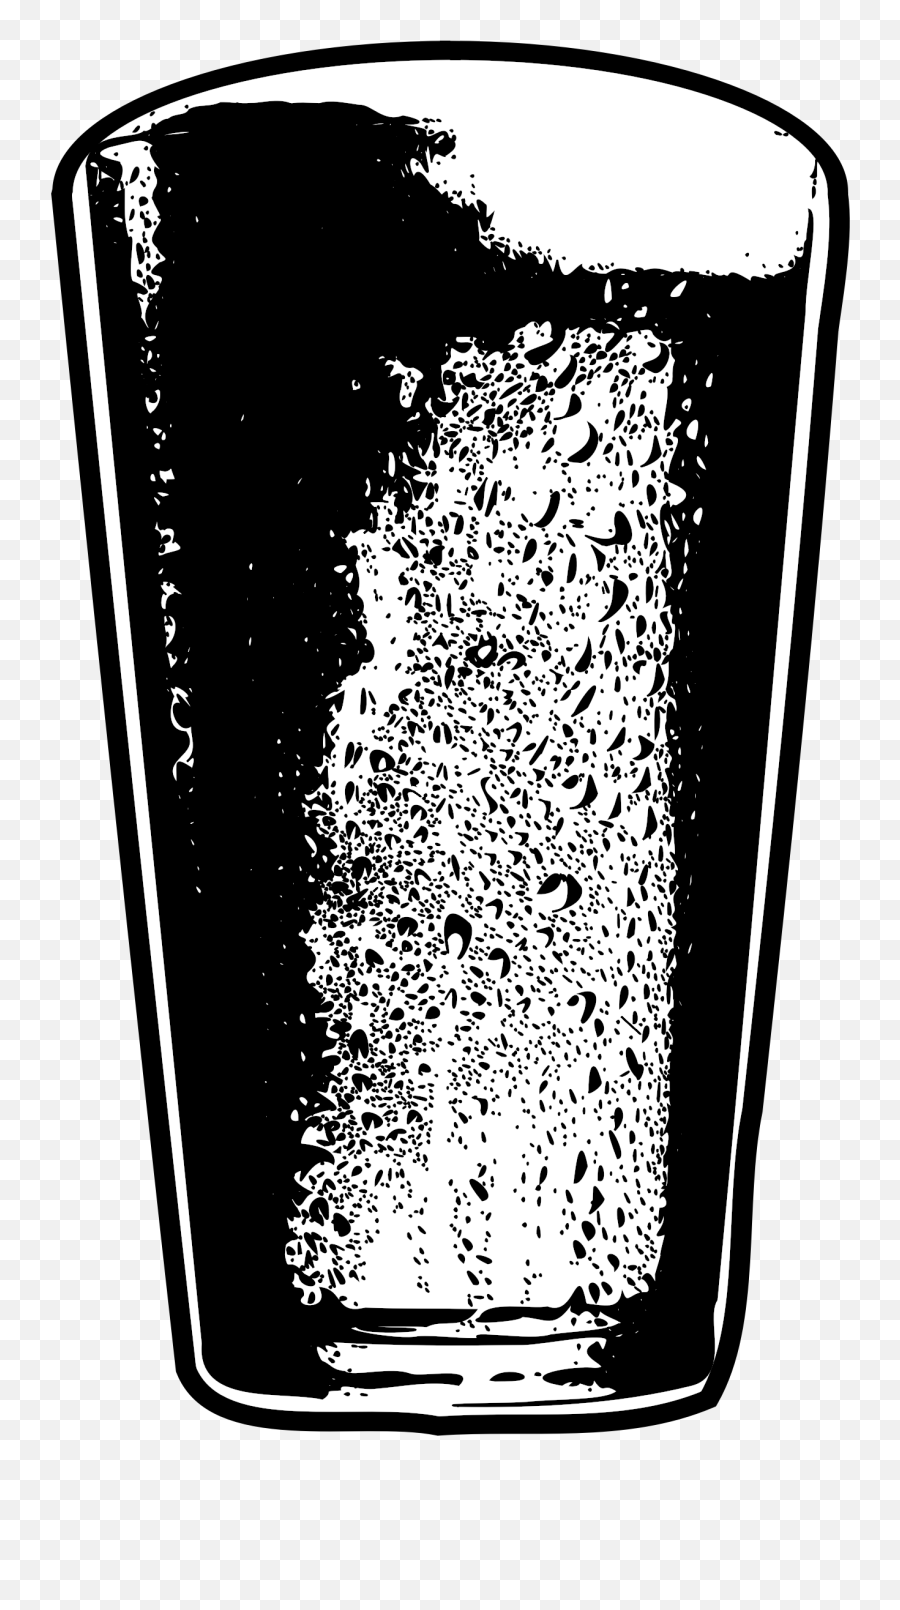 Download Hd This Free Icons Png Design Of Pint Beer - Pint Glass Beer Black And White,Beer Mug Icon Png